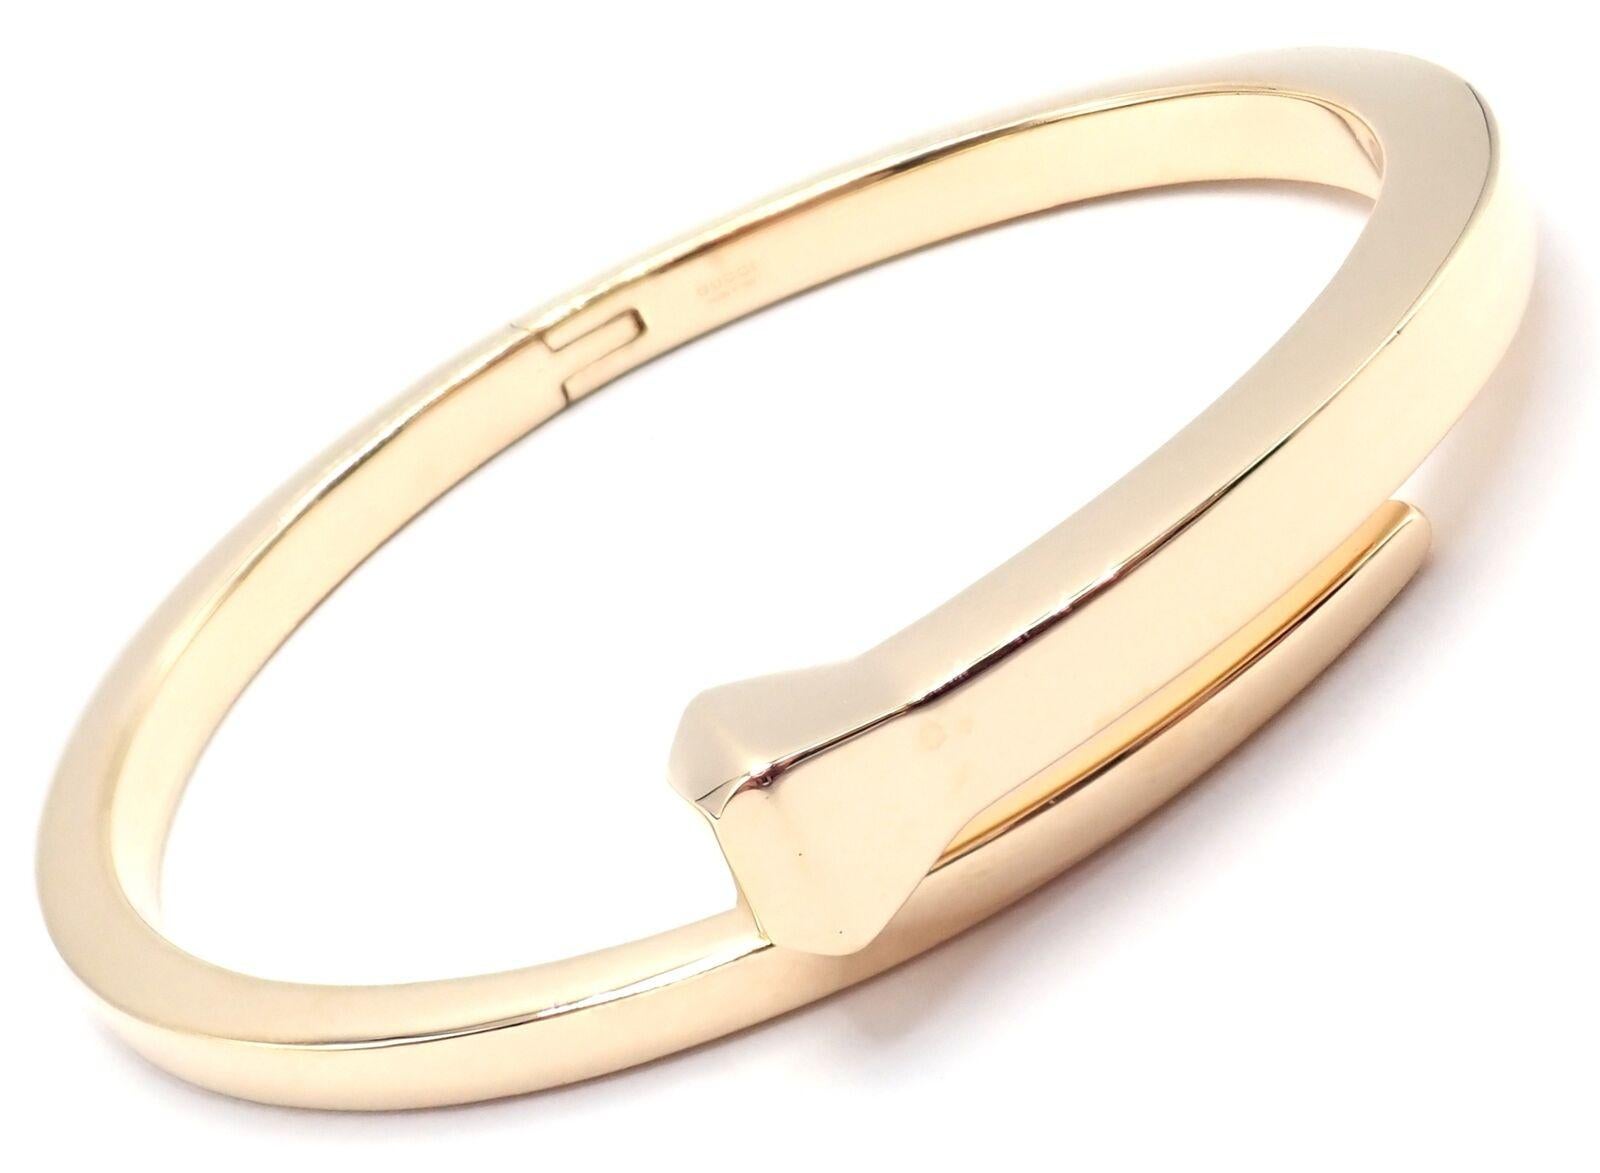 18k yellow gold Chiodo Bangle Bracelet by Gucci.
Details:
Size: 17 (17cm)
Width: 12mm
Weight: 34.1 grams
Stamped Hallmarks: Gucci 750 Made in Italy 17
*FREE Shipping within the United States* 
Your Price: $7,000
T3434toed